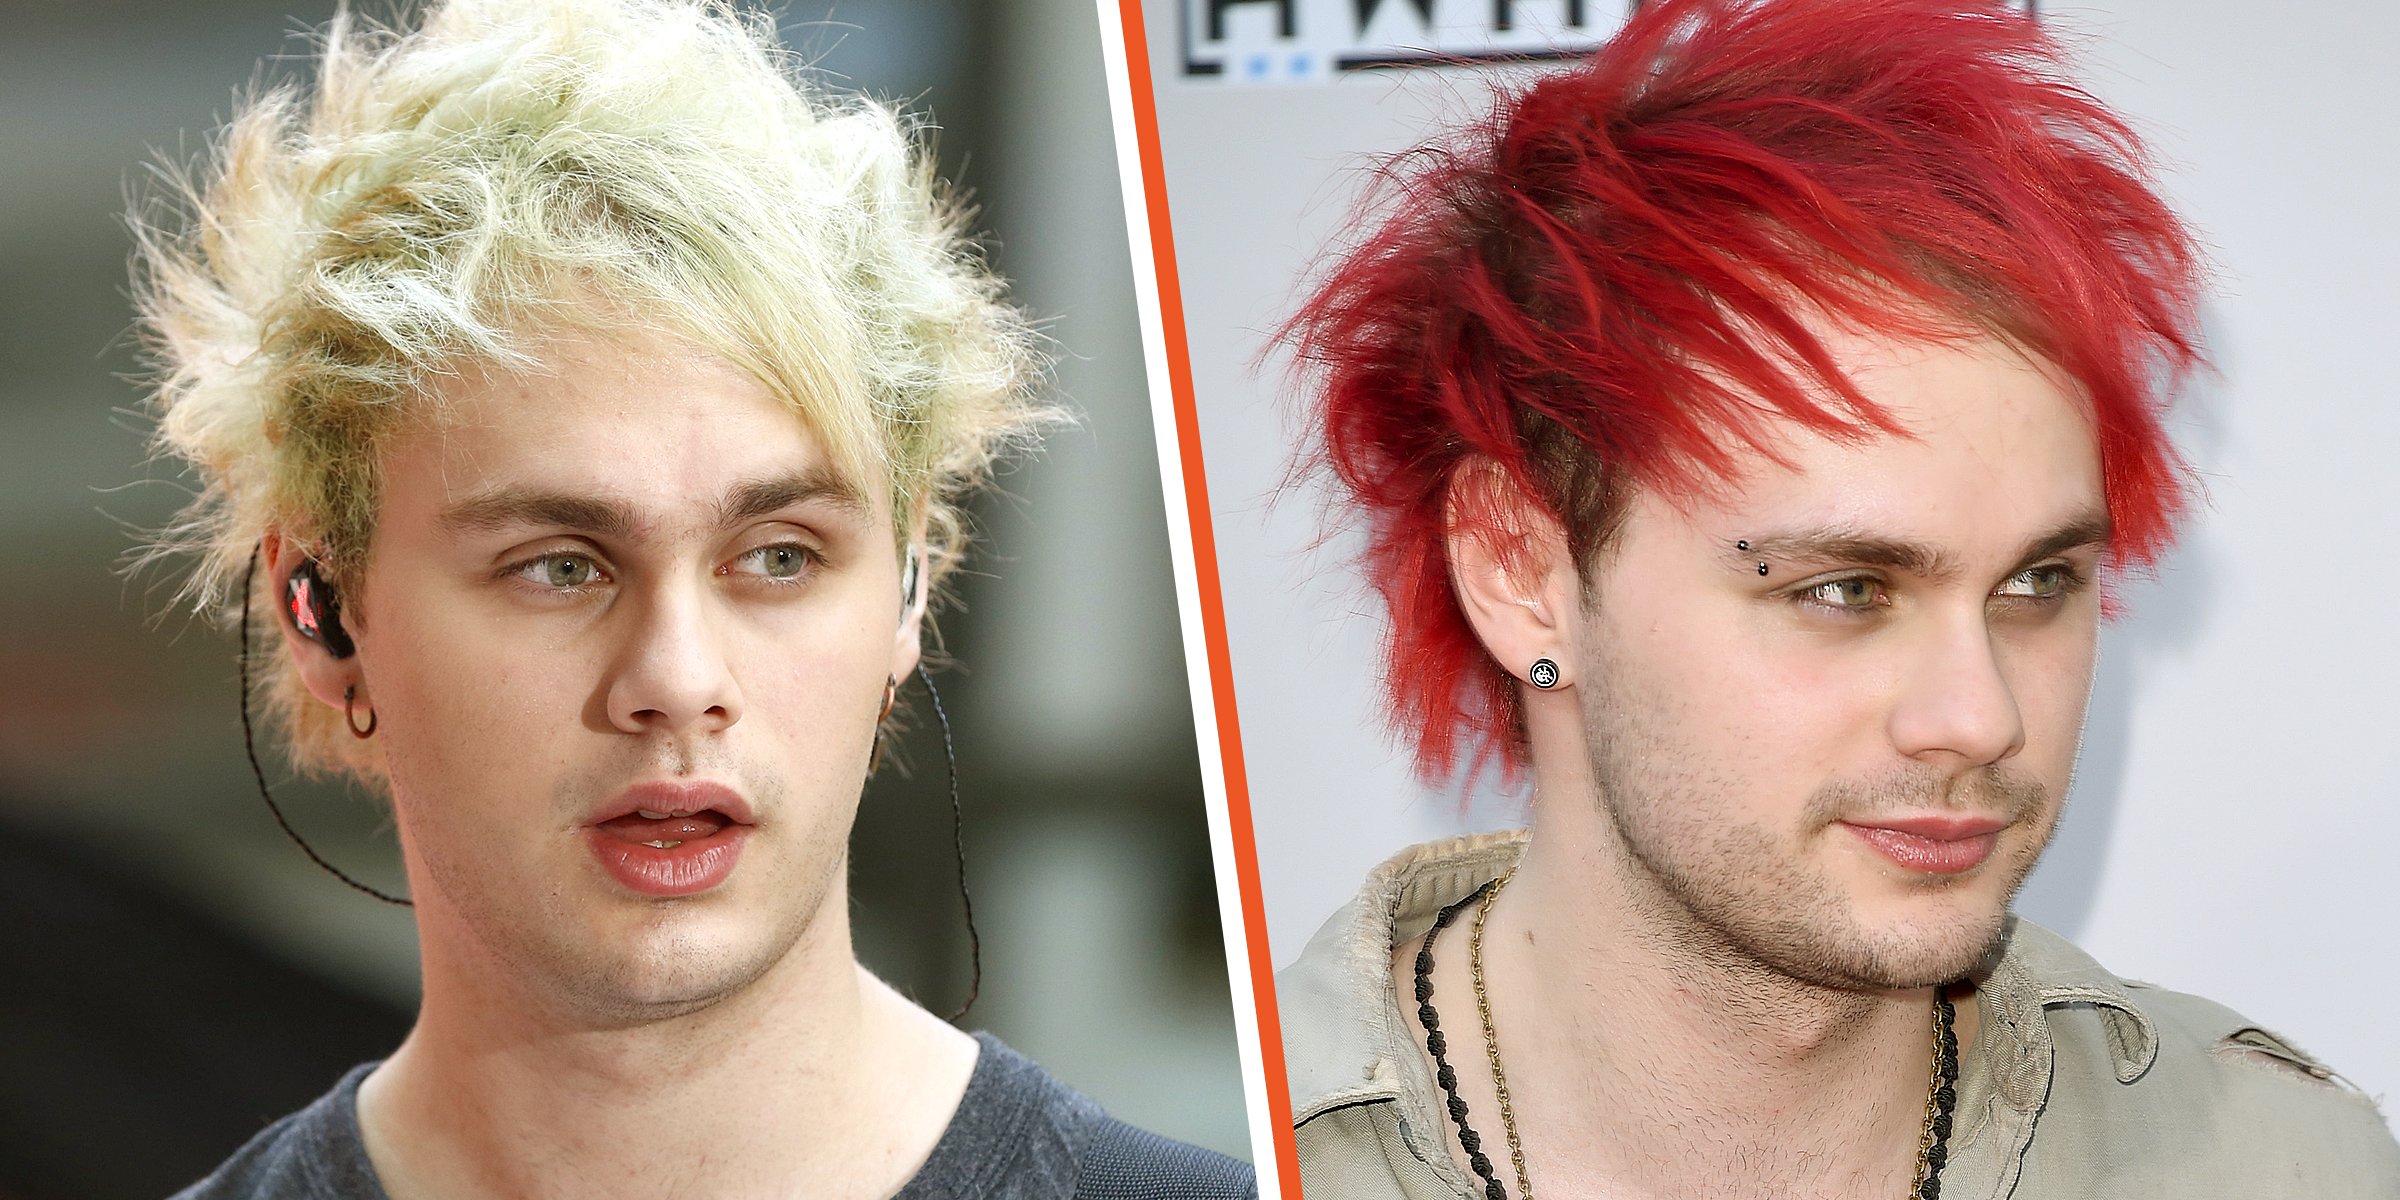 Michael Clifford | Source: Getty Images